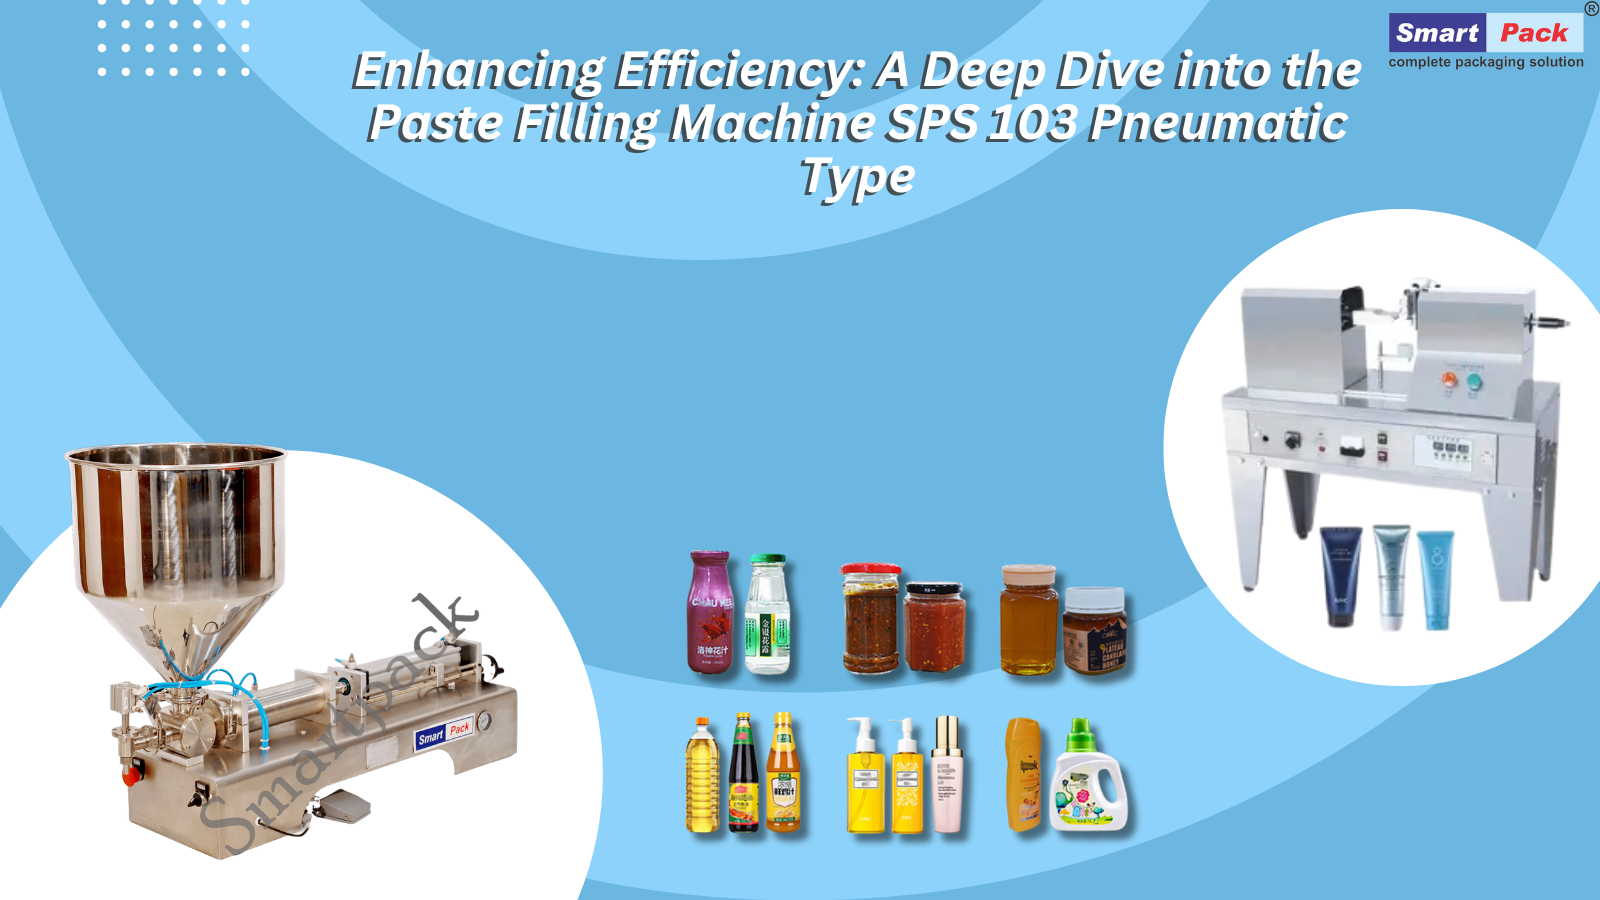 Enhancing Efficiency: A Deep Dive into the Paste Filling Machine SPS 103 Pneumatic Type